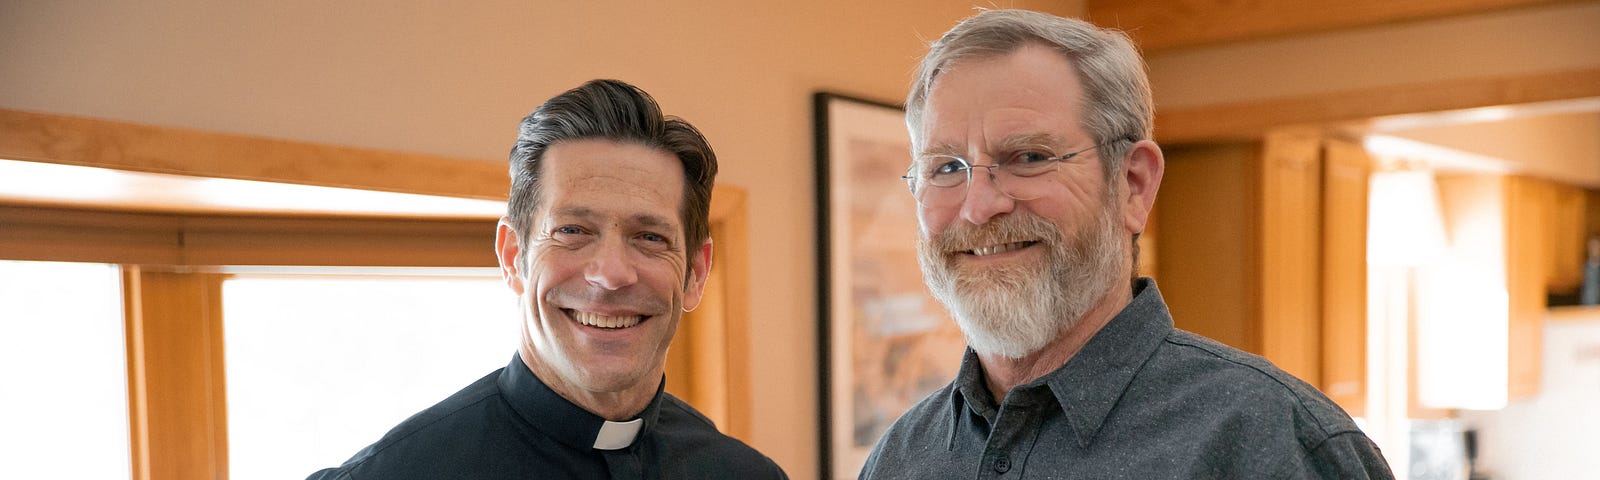 Father Mike Schmitz (left) was inspired to start the history-making Bible in a Year podcast and the Catechism in a Year podcast with Jeff Cavins, creator of The Great Adventure Catholic Bible -image courtesy of Ascension Press.